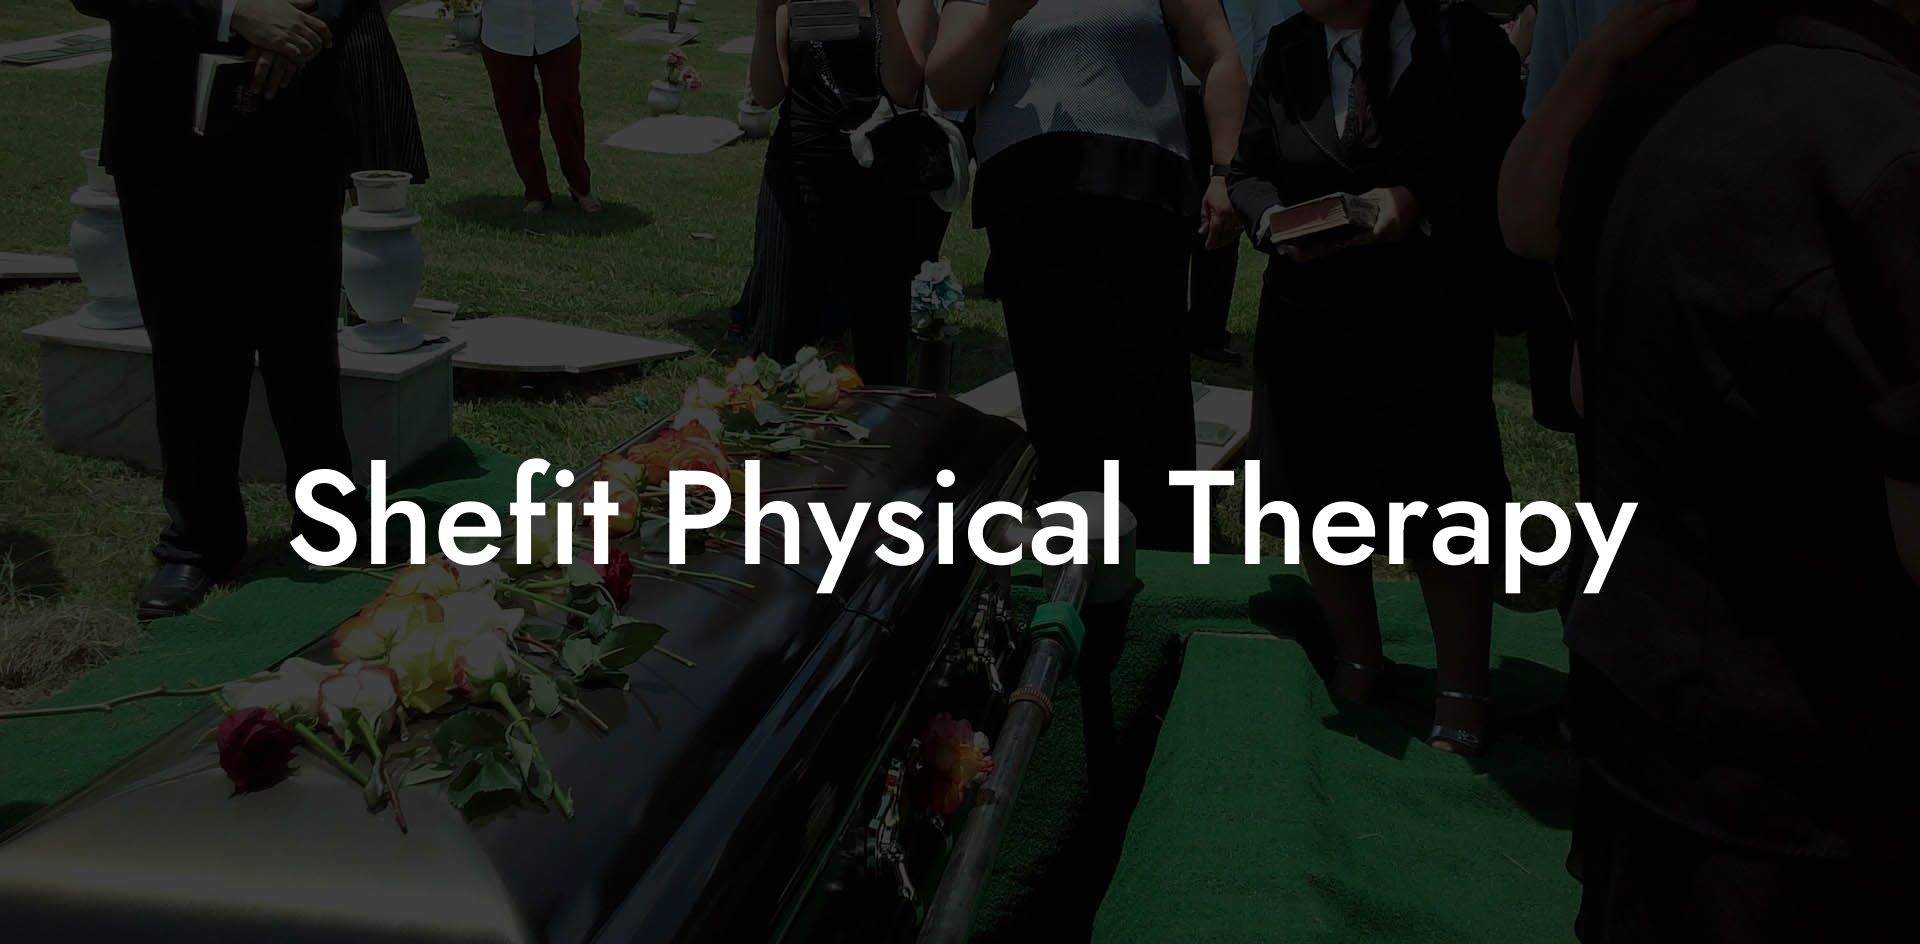 Shefit Physical Therapy